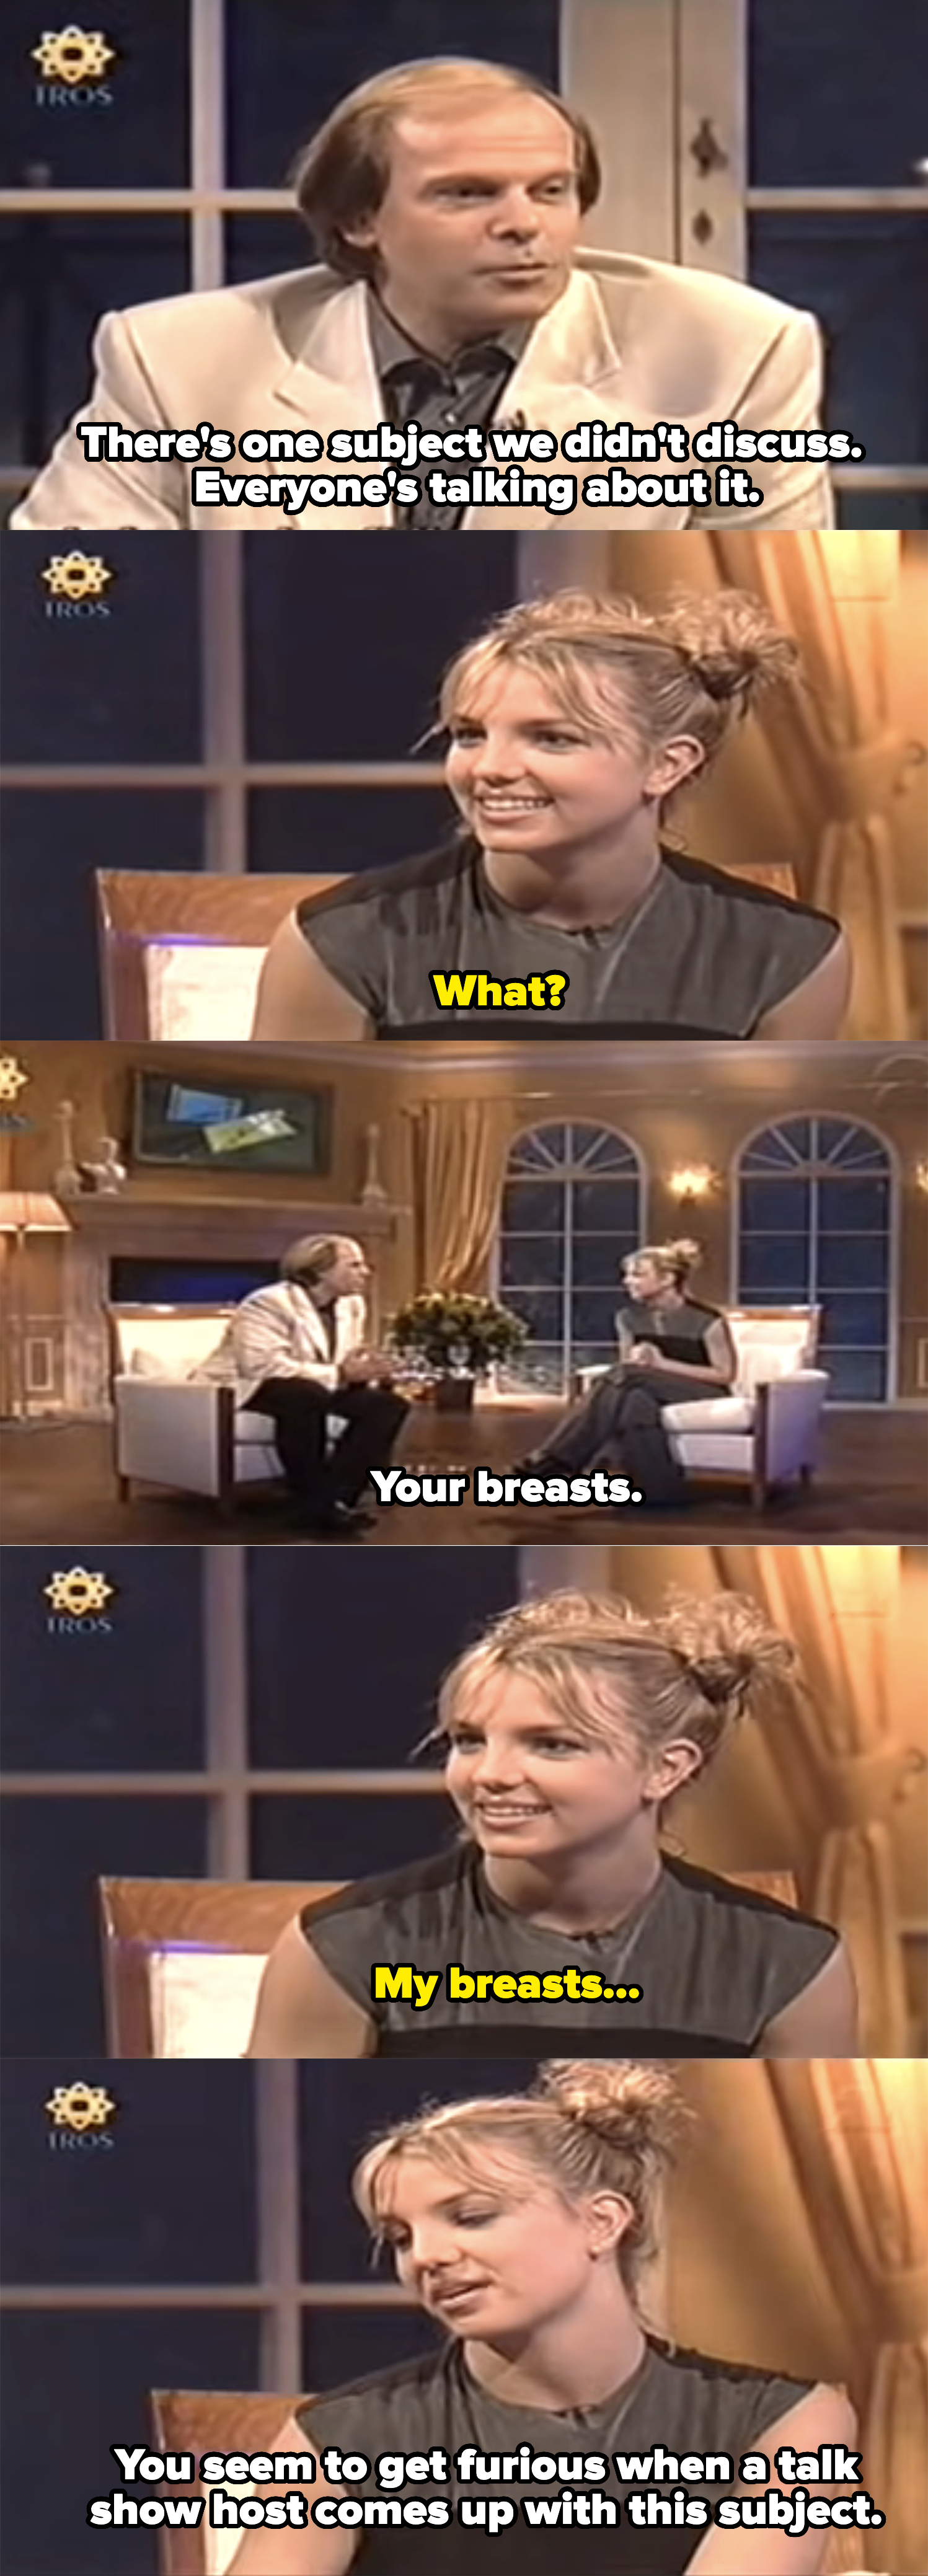 Interview saying how Britney seems to get furious when a talk show host comes up with the subject of her breasts